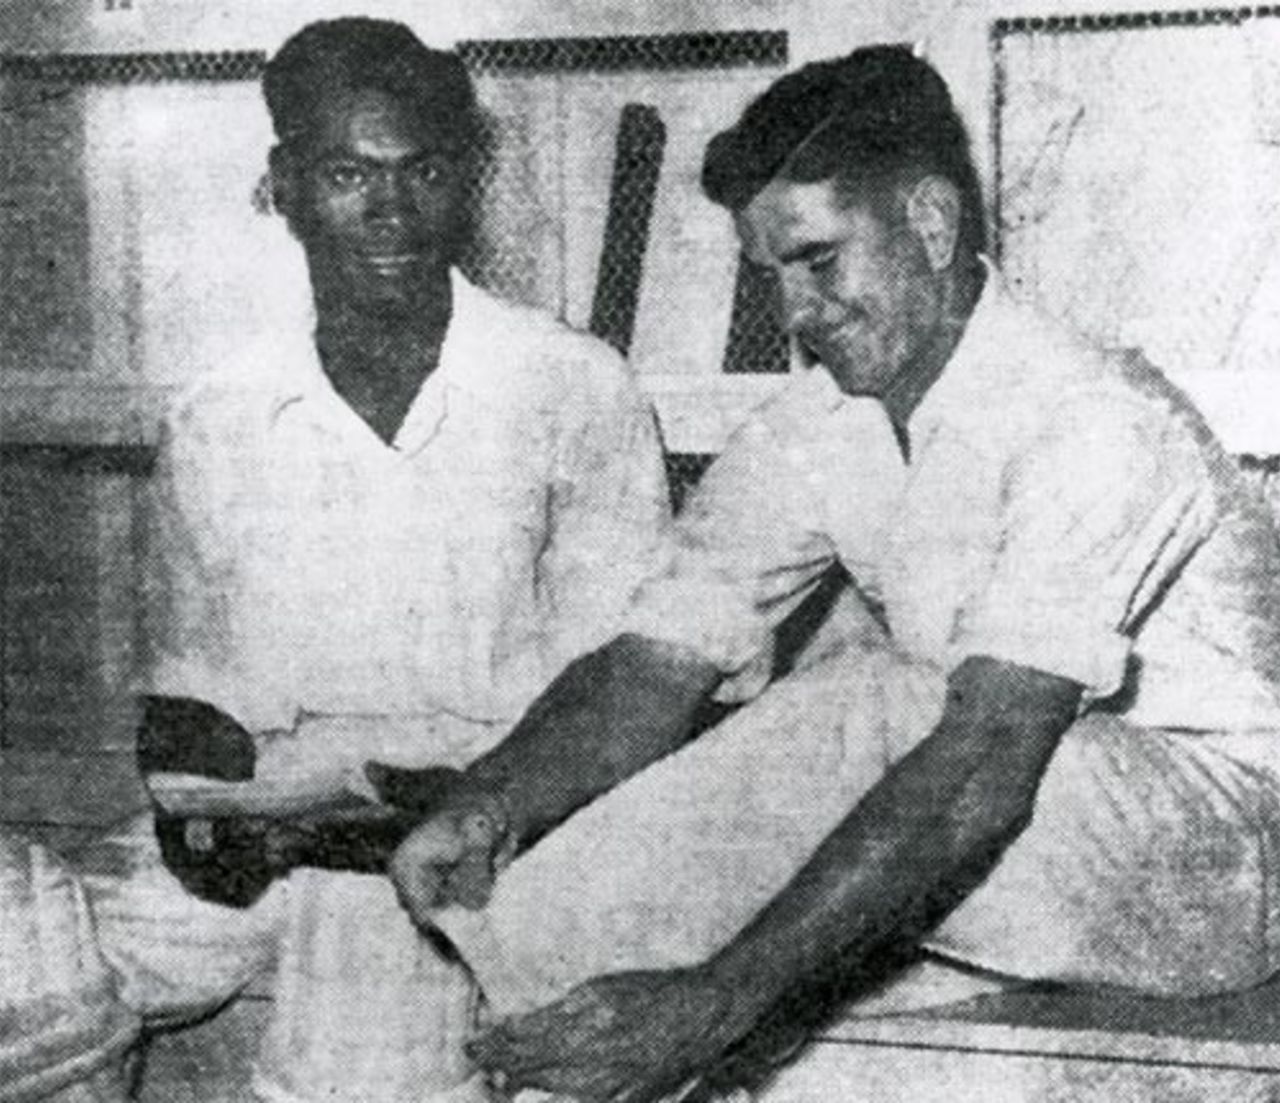 Clairmonte Depeiaza and Denis Atkinson relax during their world record stand, West Indies v Australia, Barbados, May 18, 1955